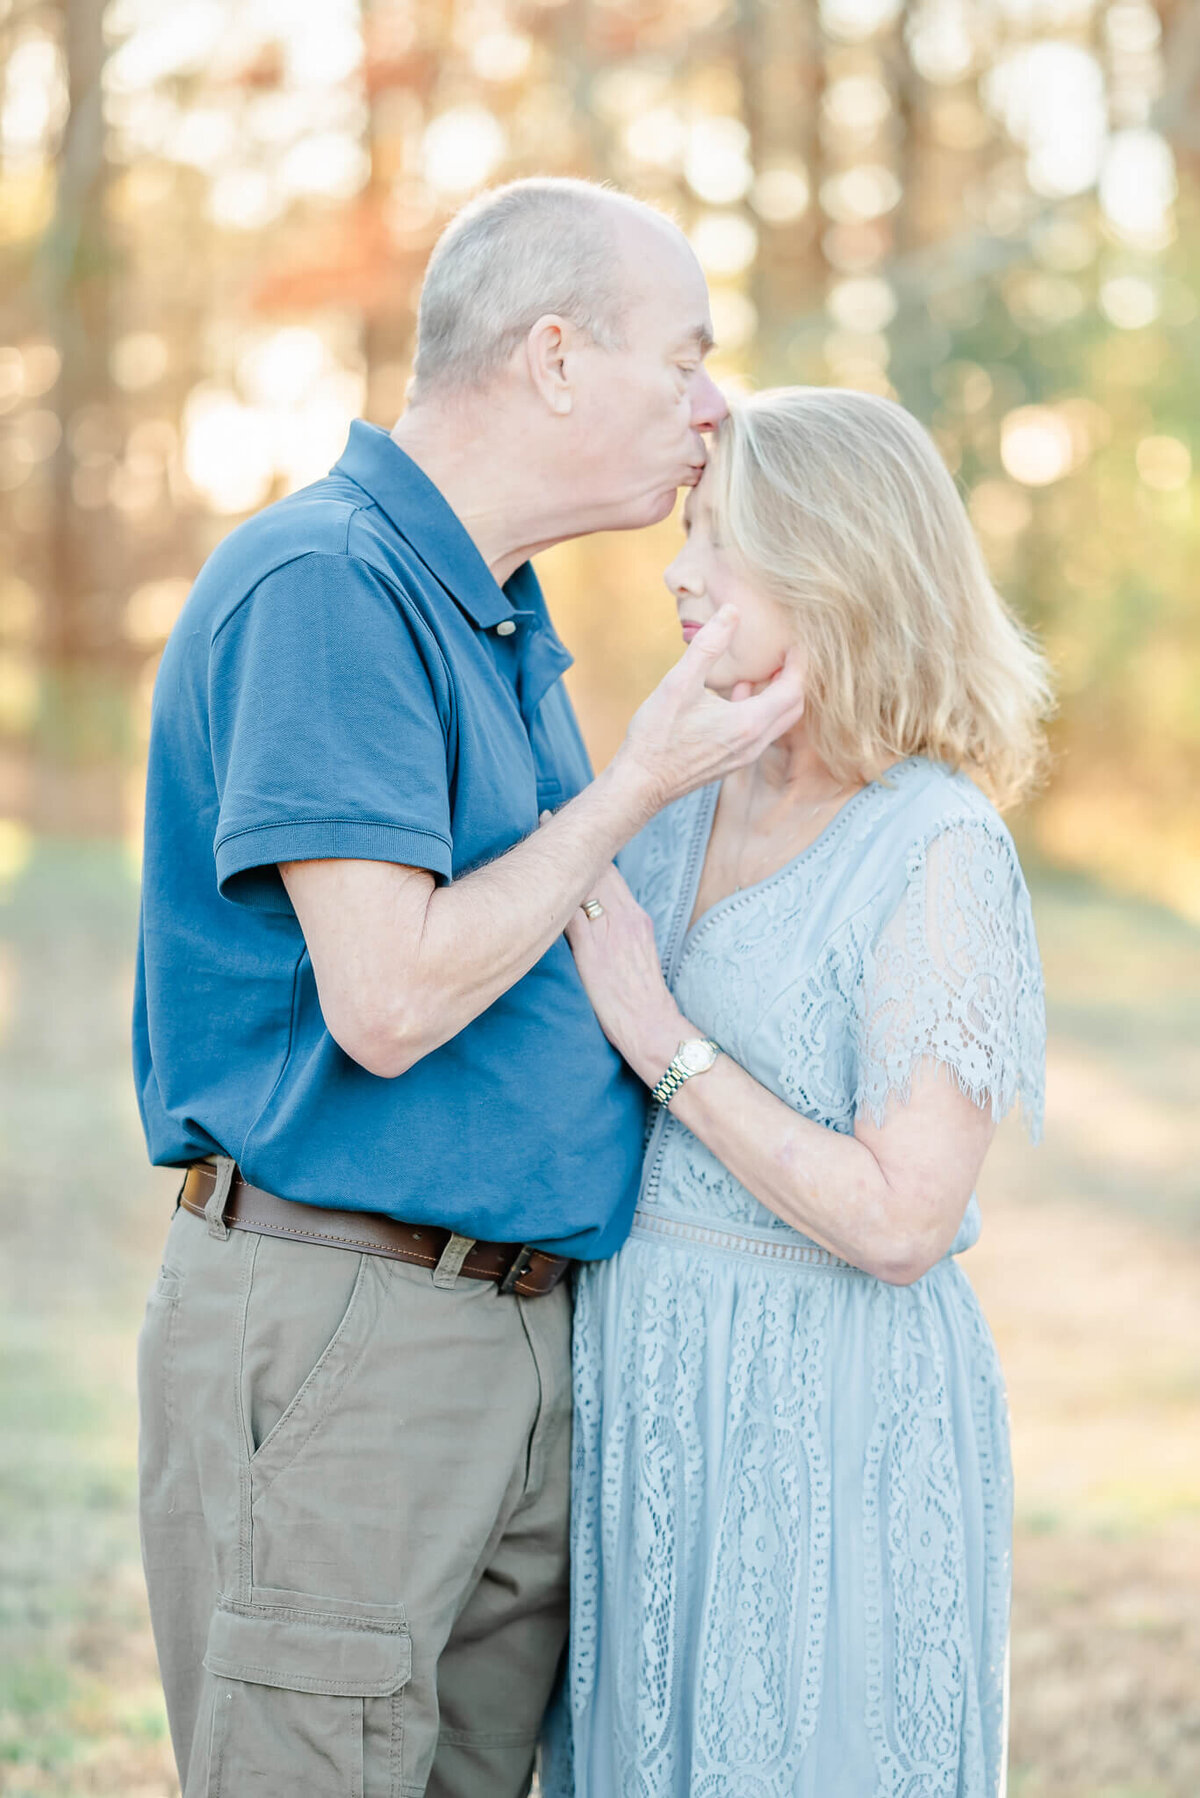 An older man, wearing a navy shirt, kisses his wife on the forehead.  His wife, wearing a blue lace dress, closes her eyes and puts her hand on his chest.